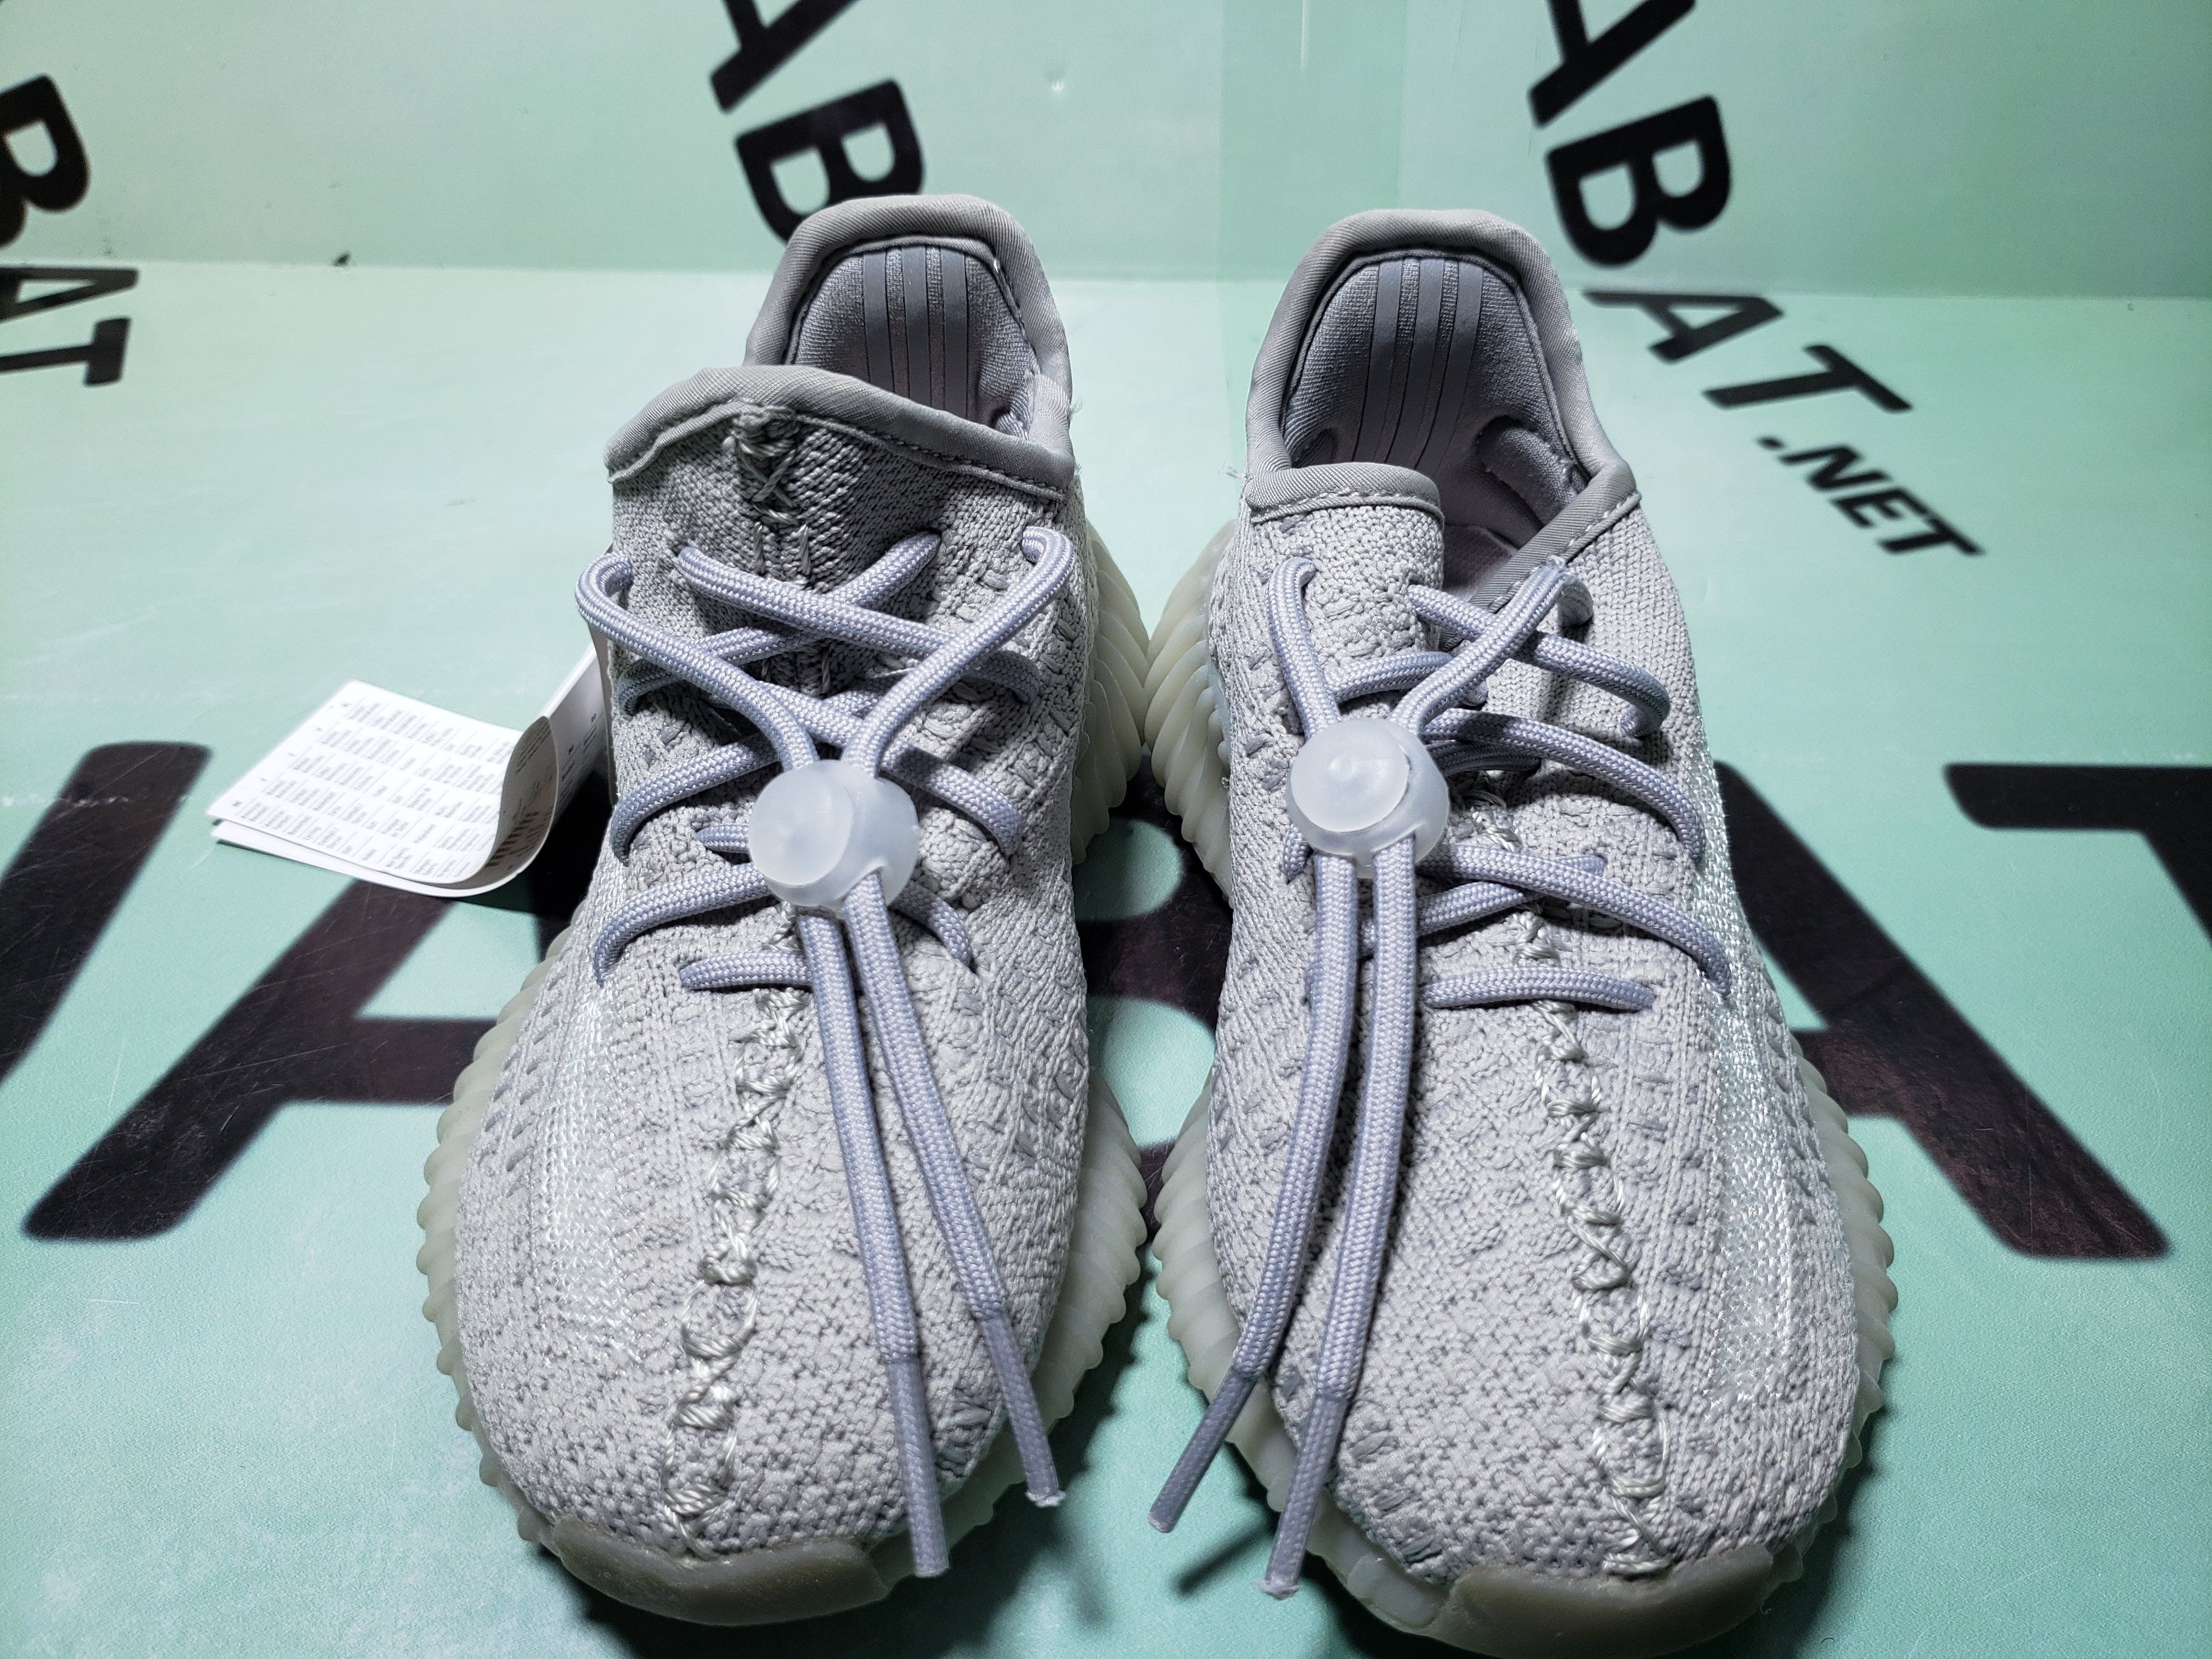 Adidas yeezy boots 700 арт 2056, uabat.net, OG Sneakers Yeezy Boost 350 V2 Tail Light